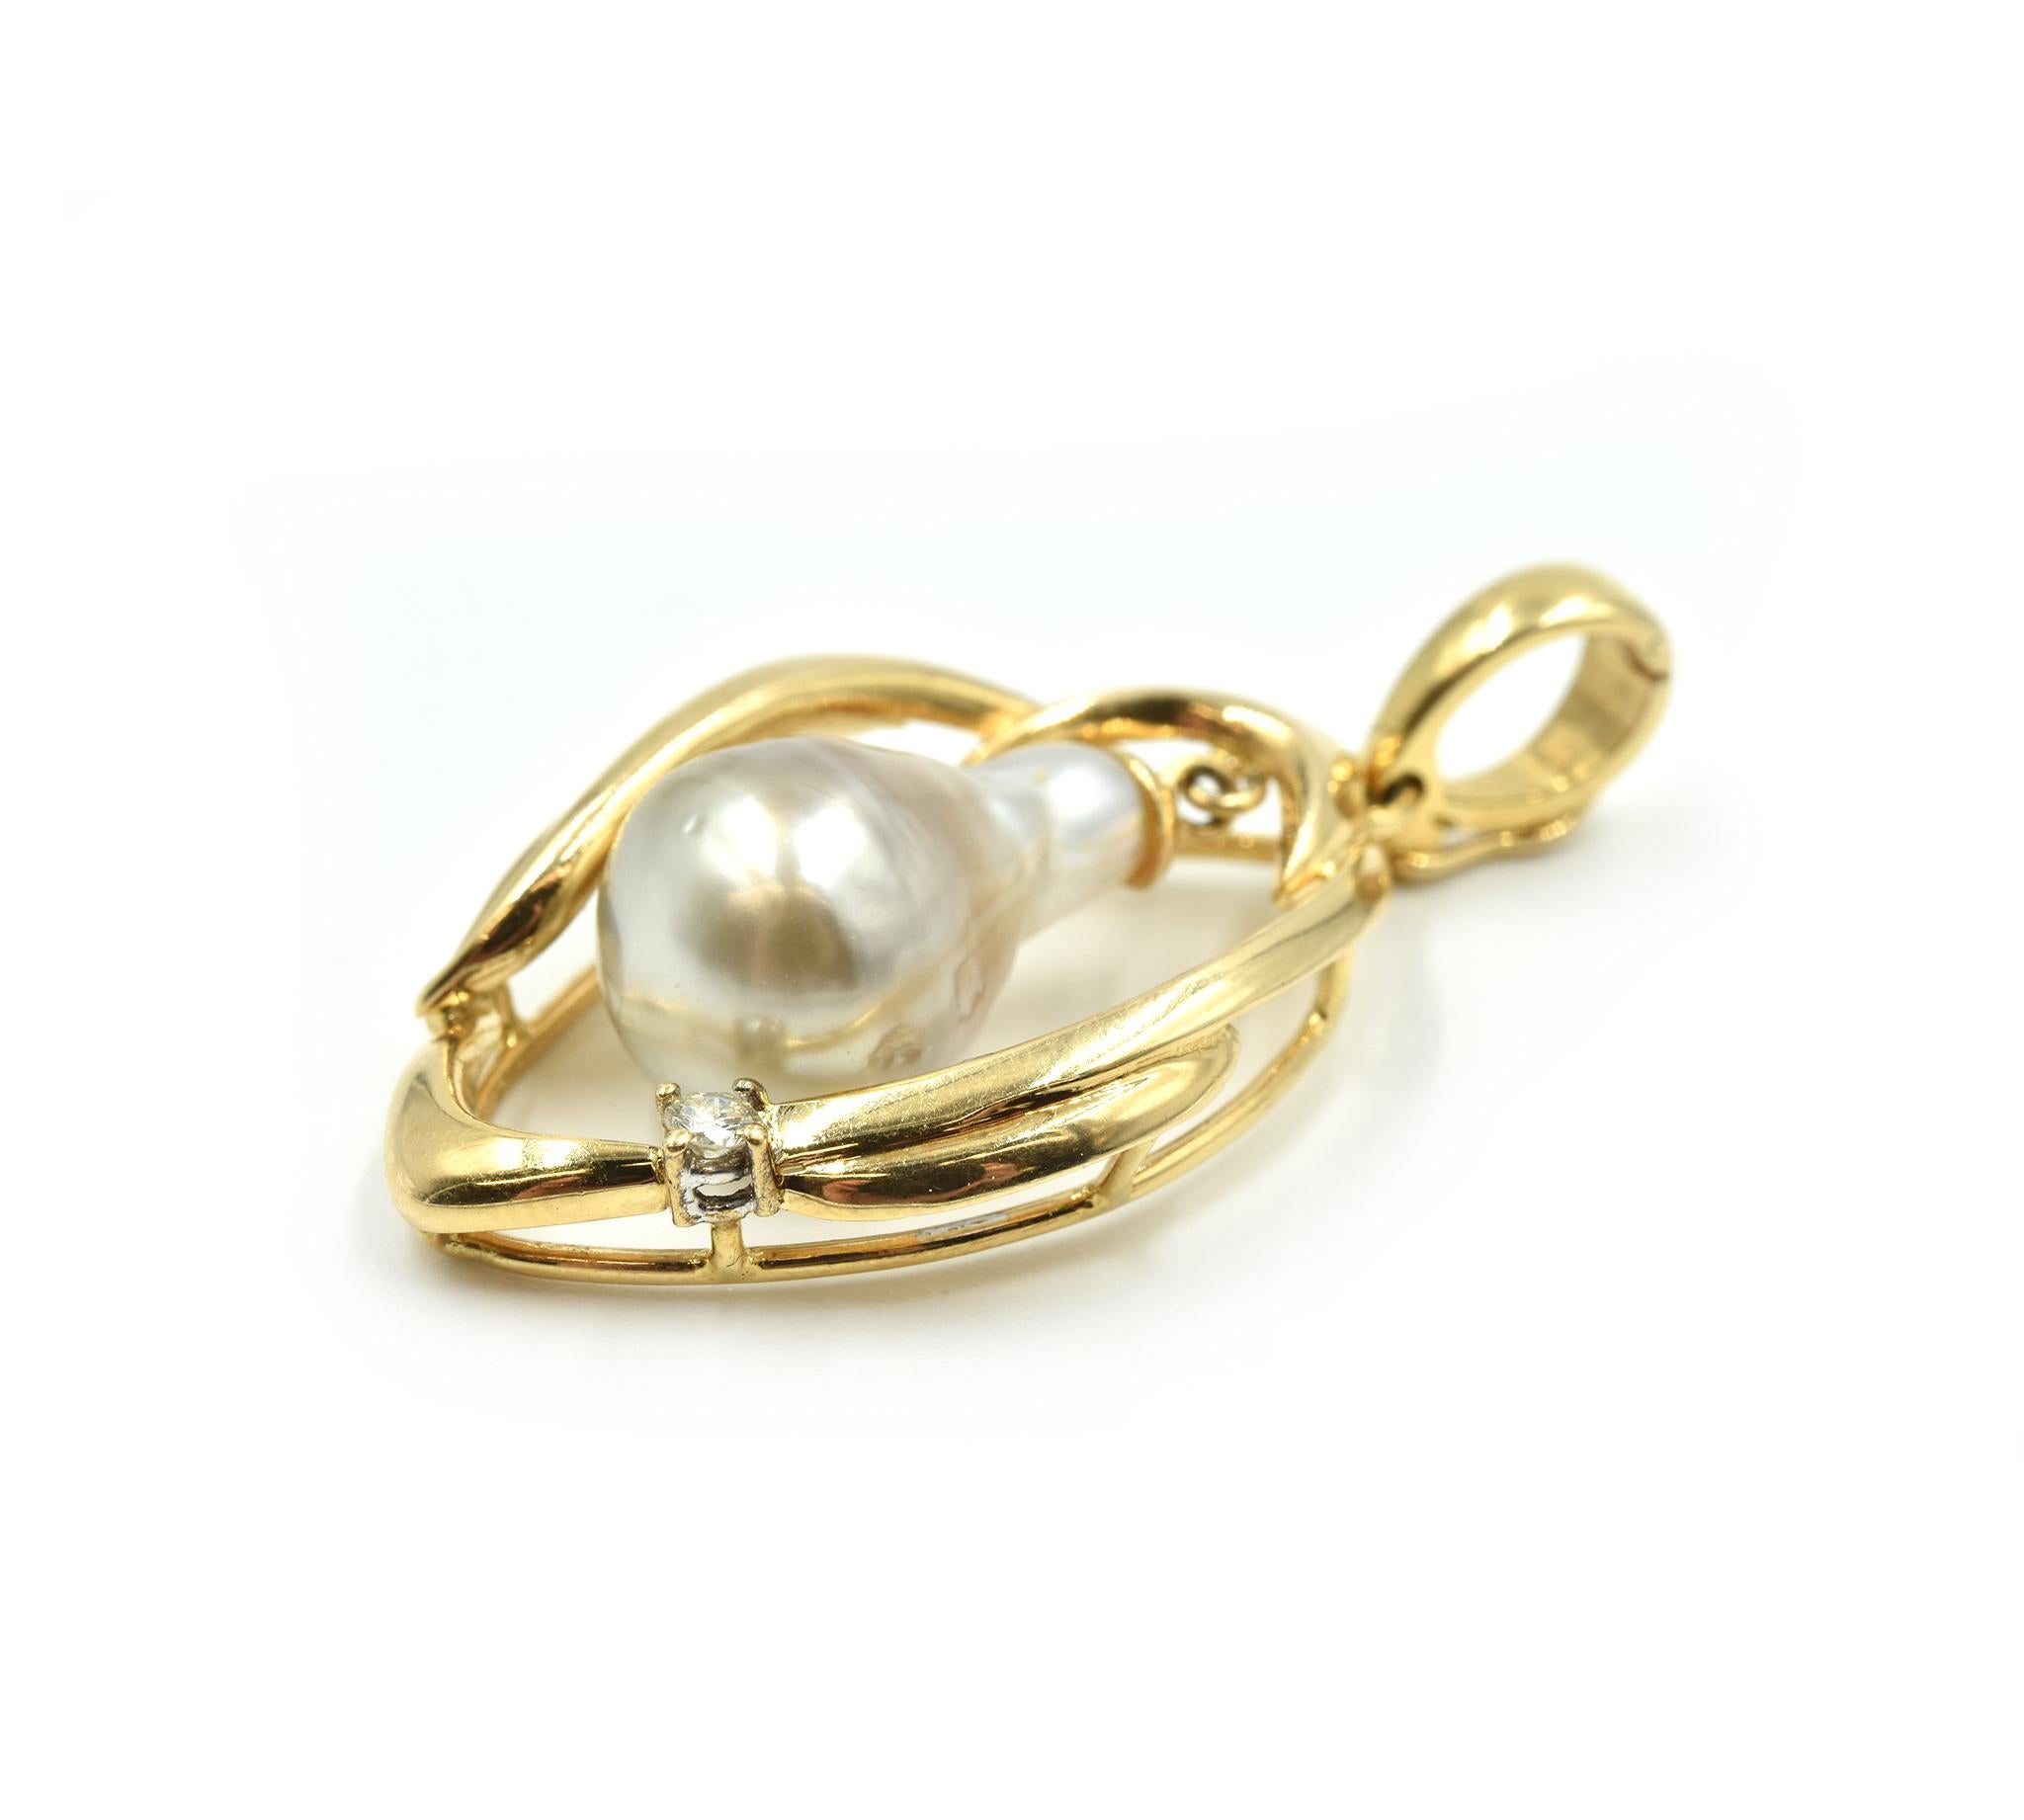 Designer: custom made
Material: 14k yellow gold
Diamonds: one round brilliant 0.05 carat diamond
Pearl: 10.50mm oval shape cultured pearl
Dimensions: the pendant measures 1 1/2 inches long and 3/4 inches wide
Weight: 6.60 grams
